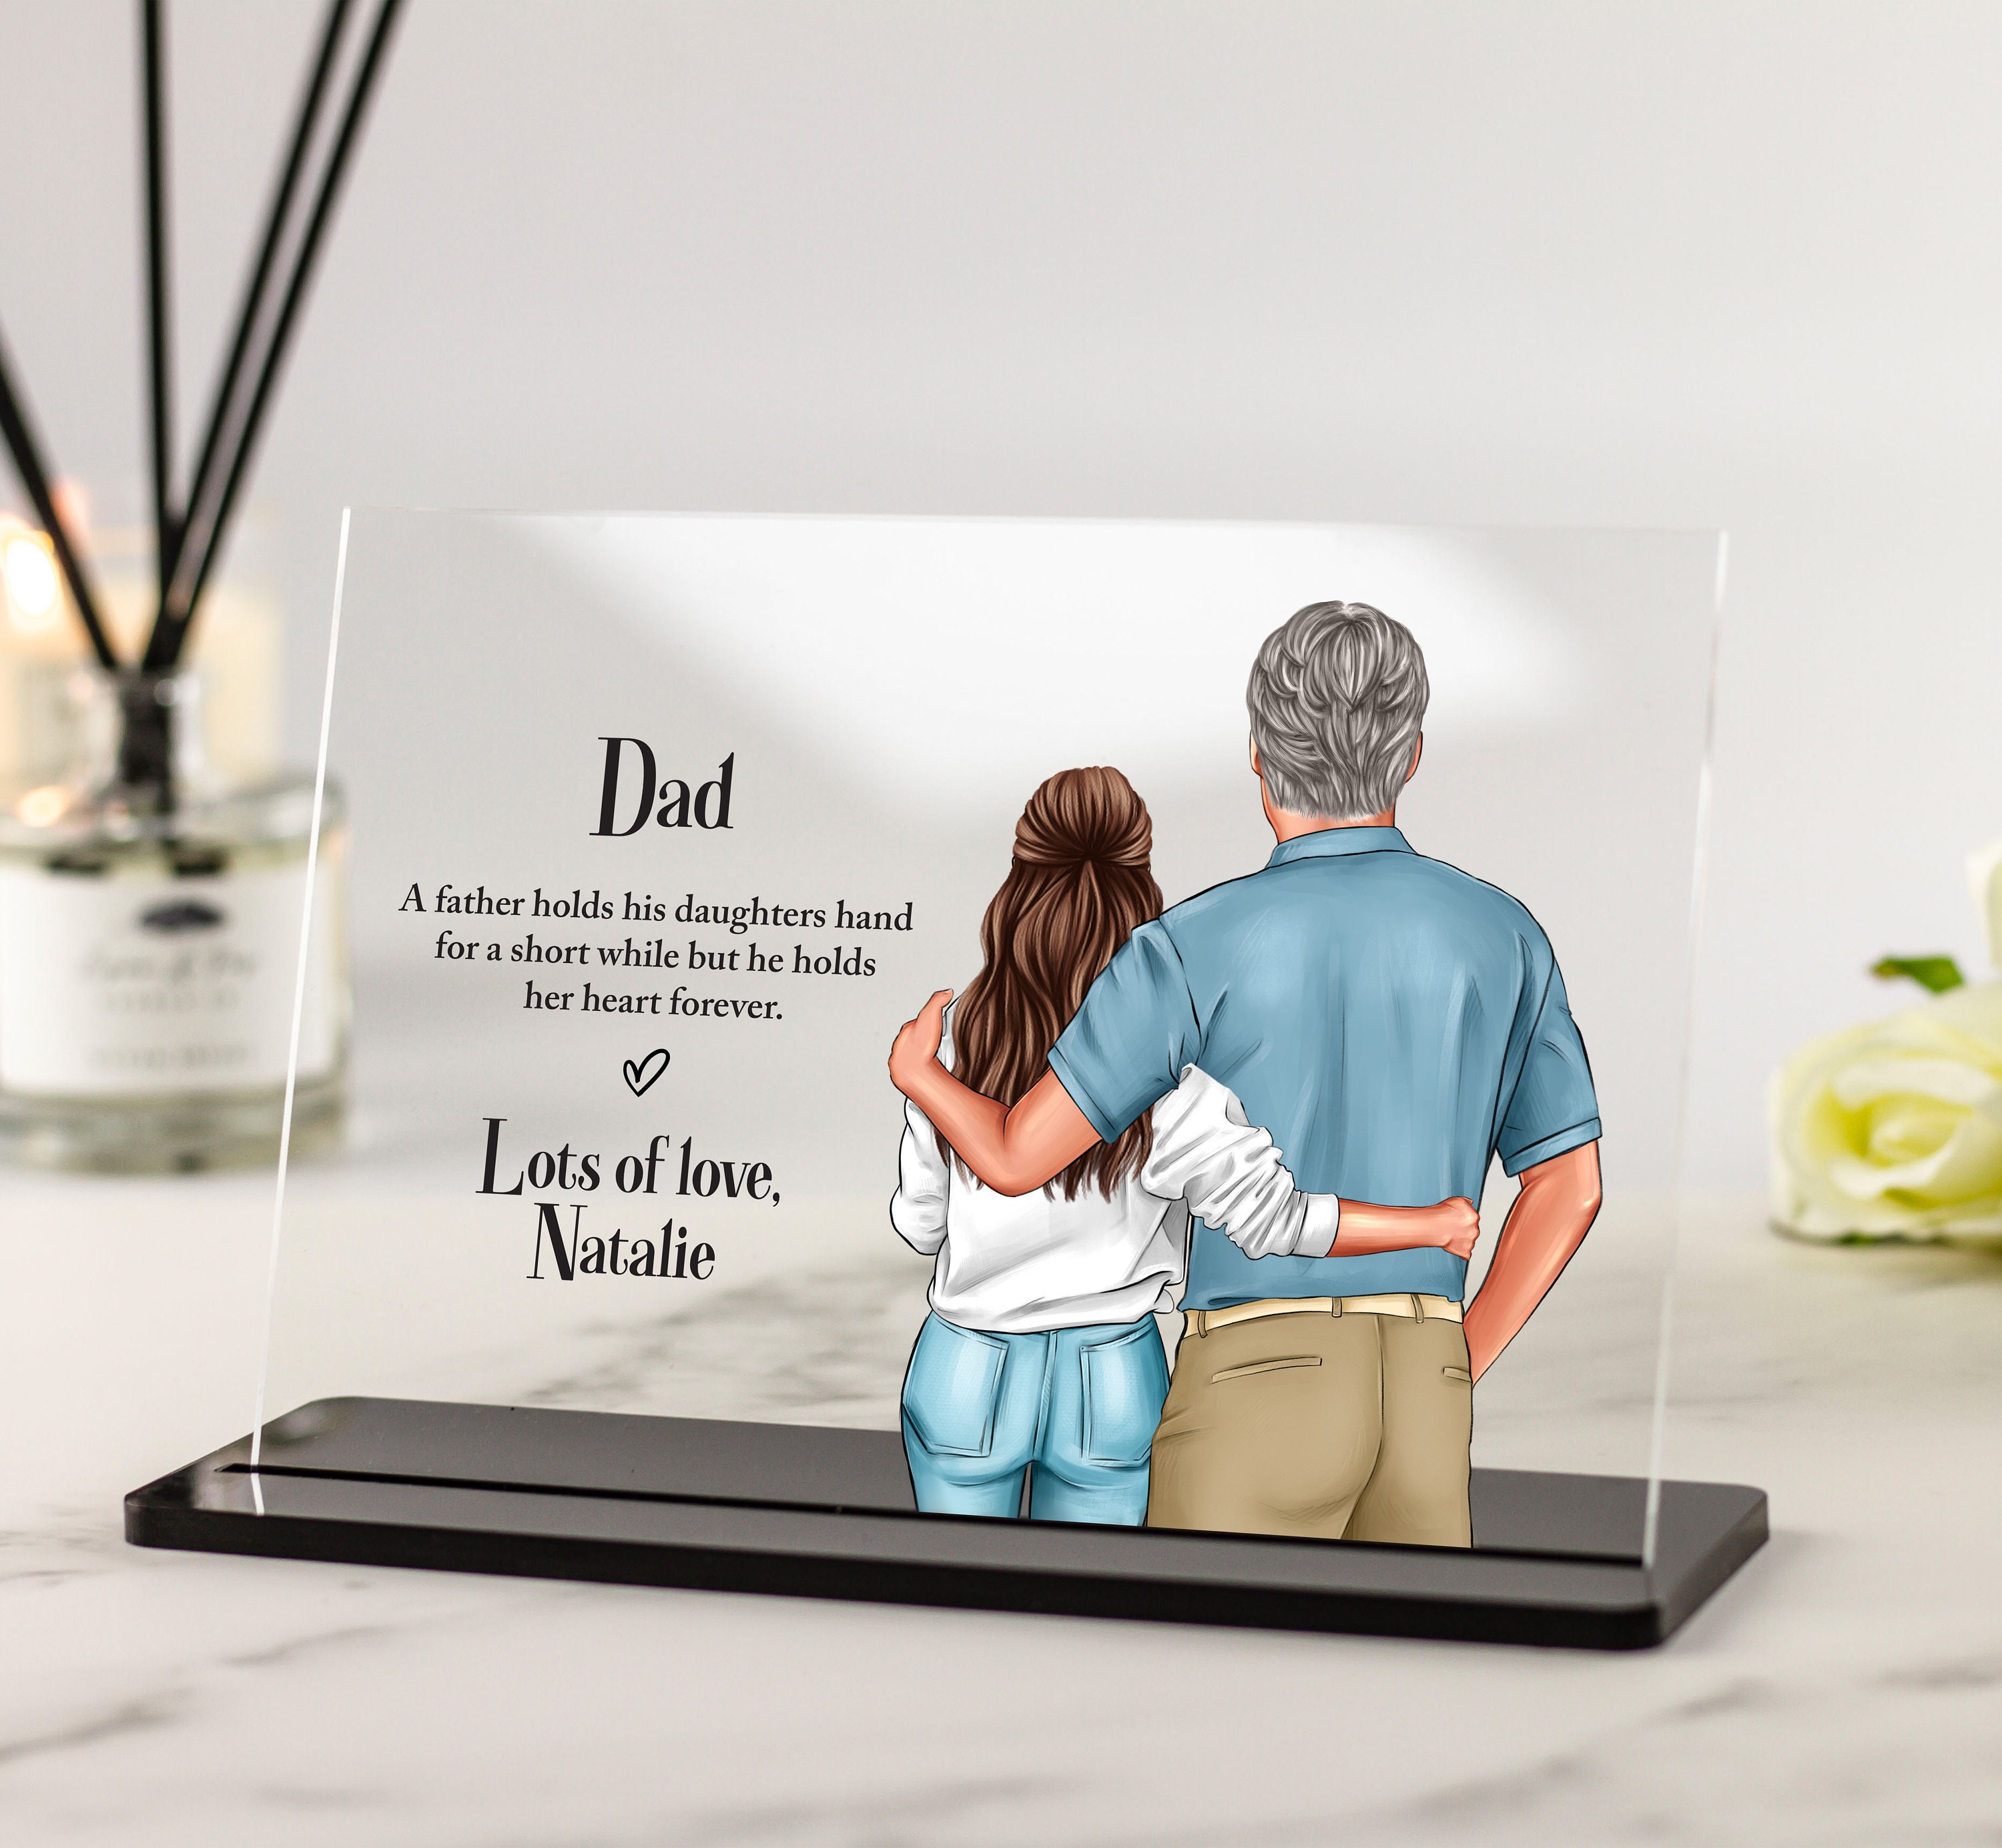 Pandasch Christmas Gifts for Dad, Best Gift for Dad from Daughter -  Personalized Engraved Acrylic Night Light with Wood Base, Unique Dad Gifts  for Thanksgiving or Christmas 